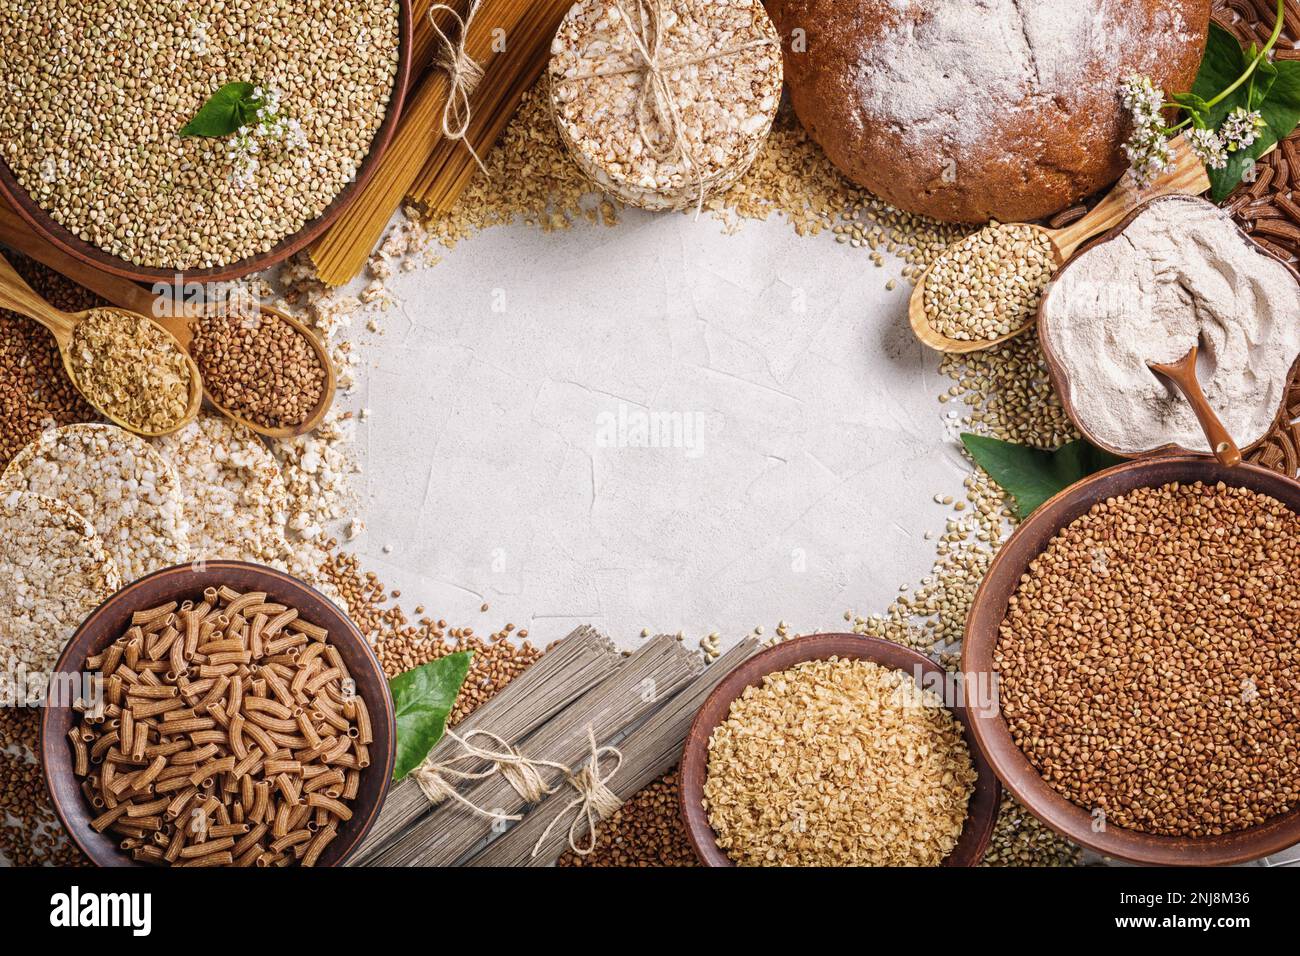 Rural still-life, top view - the peeled groats of buckwheat (Fagopyrum esculentum) and products made from it, as background, closeup Stock Photo